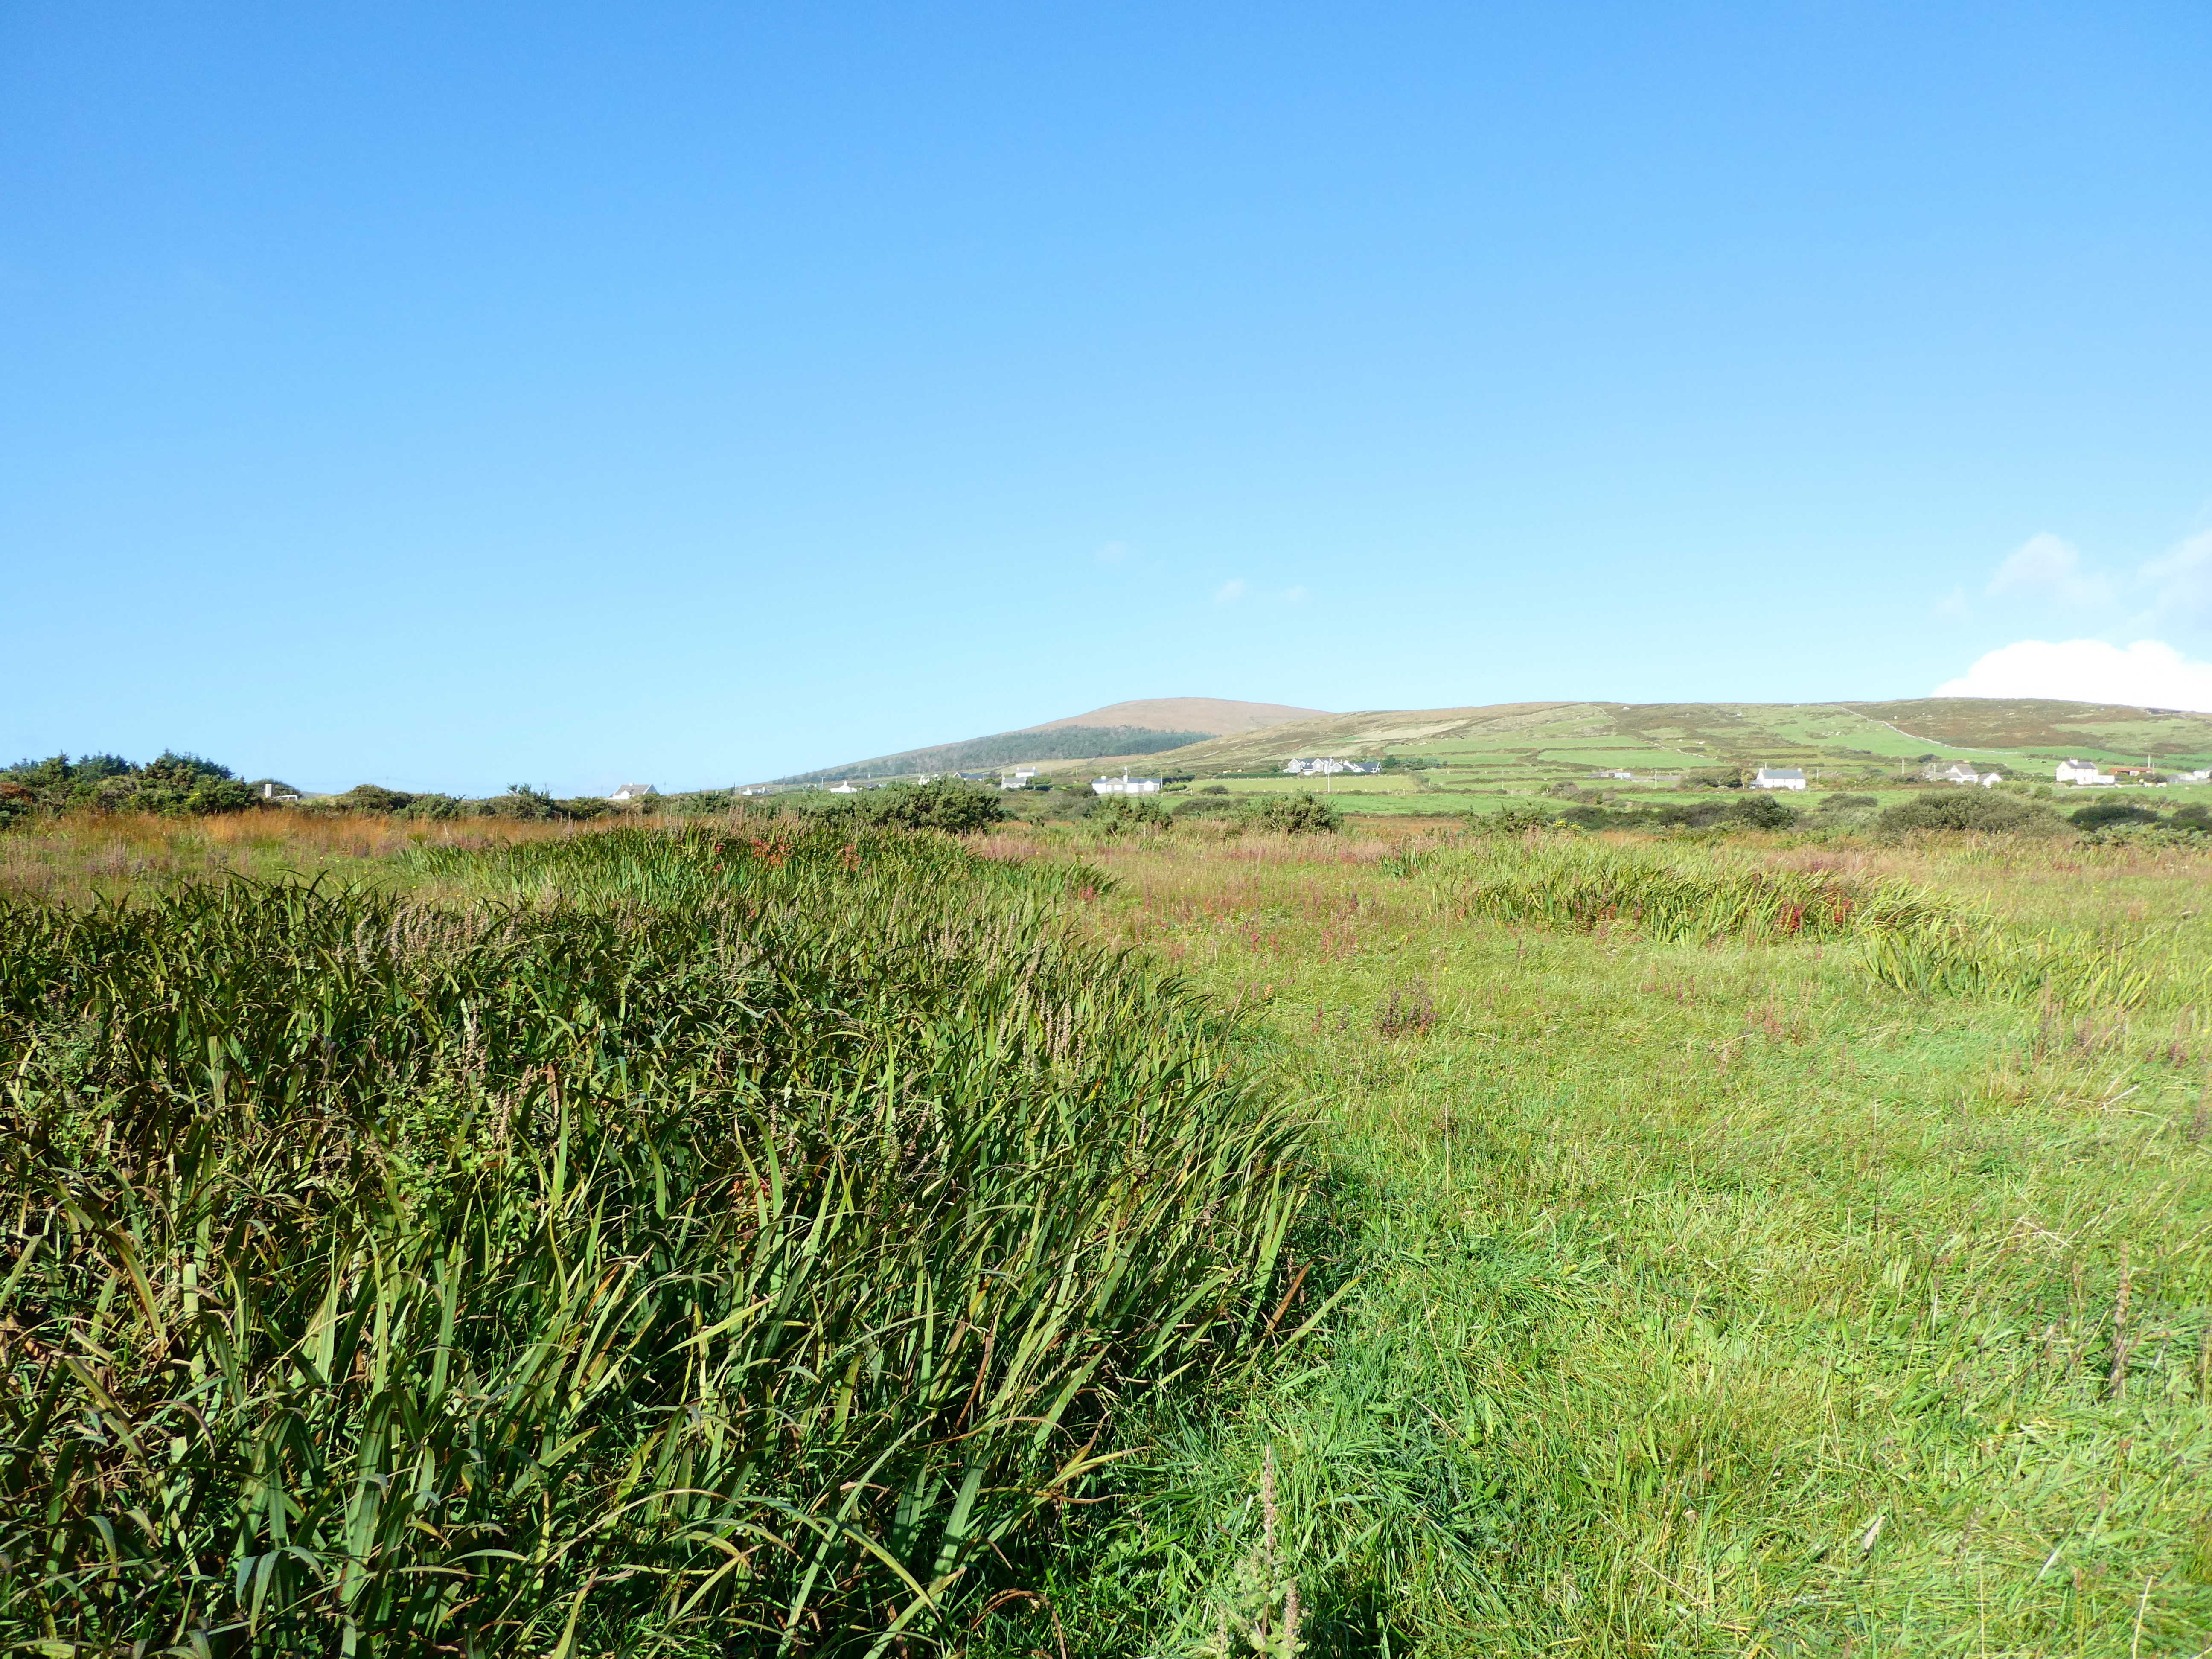 FOR SALE 2.29 Hectares/5.65 Acres of Land at Ballinskelligs.